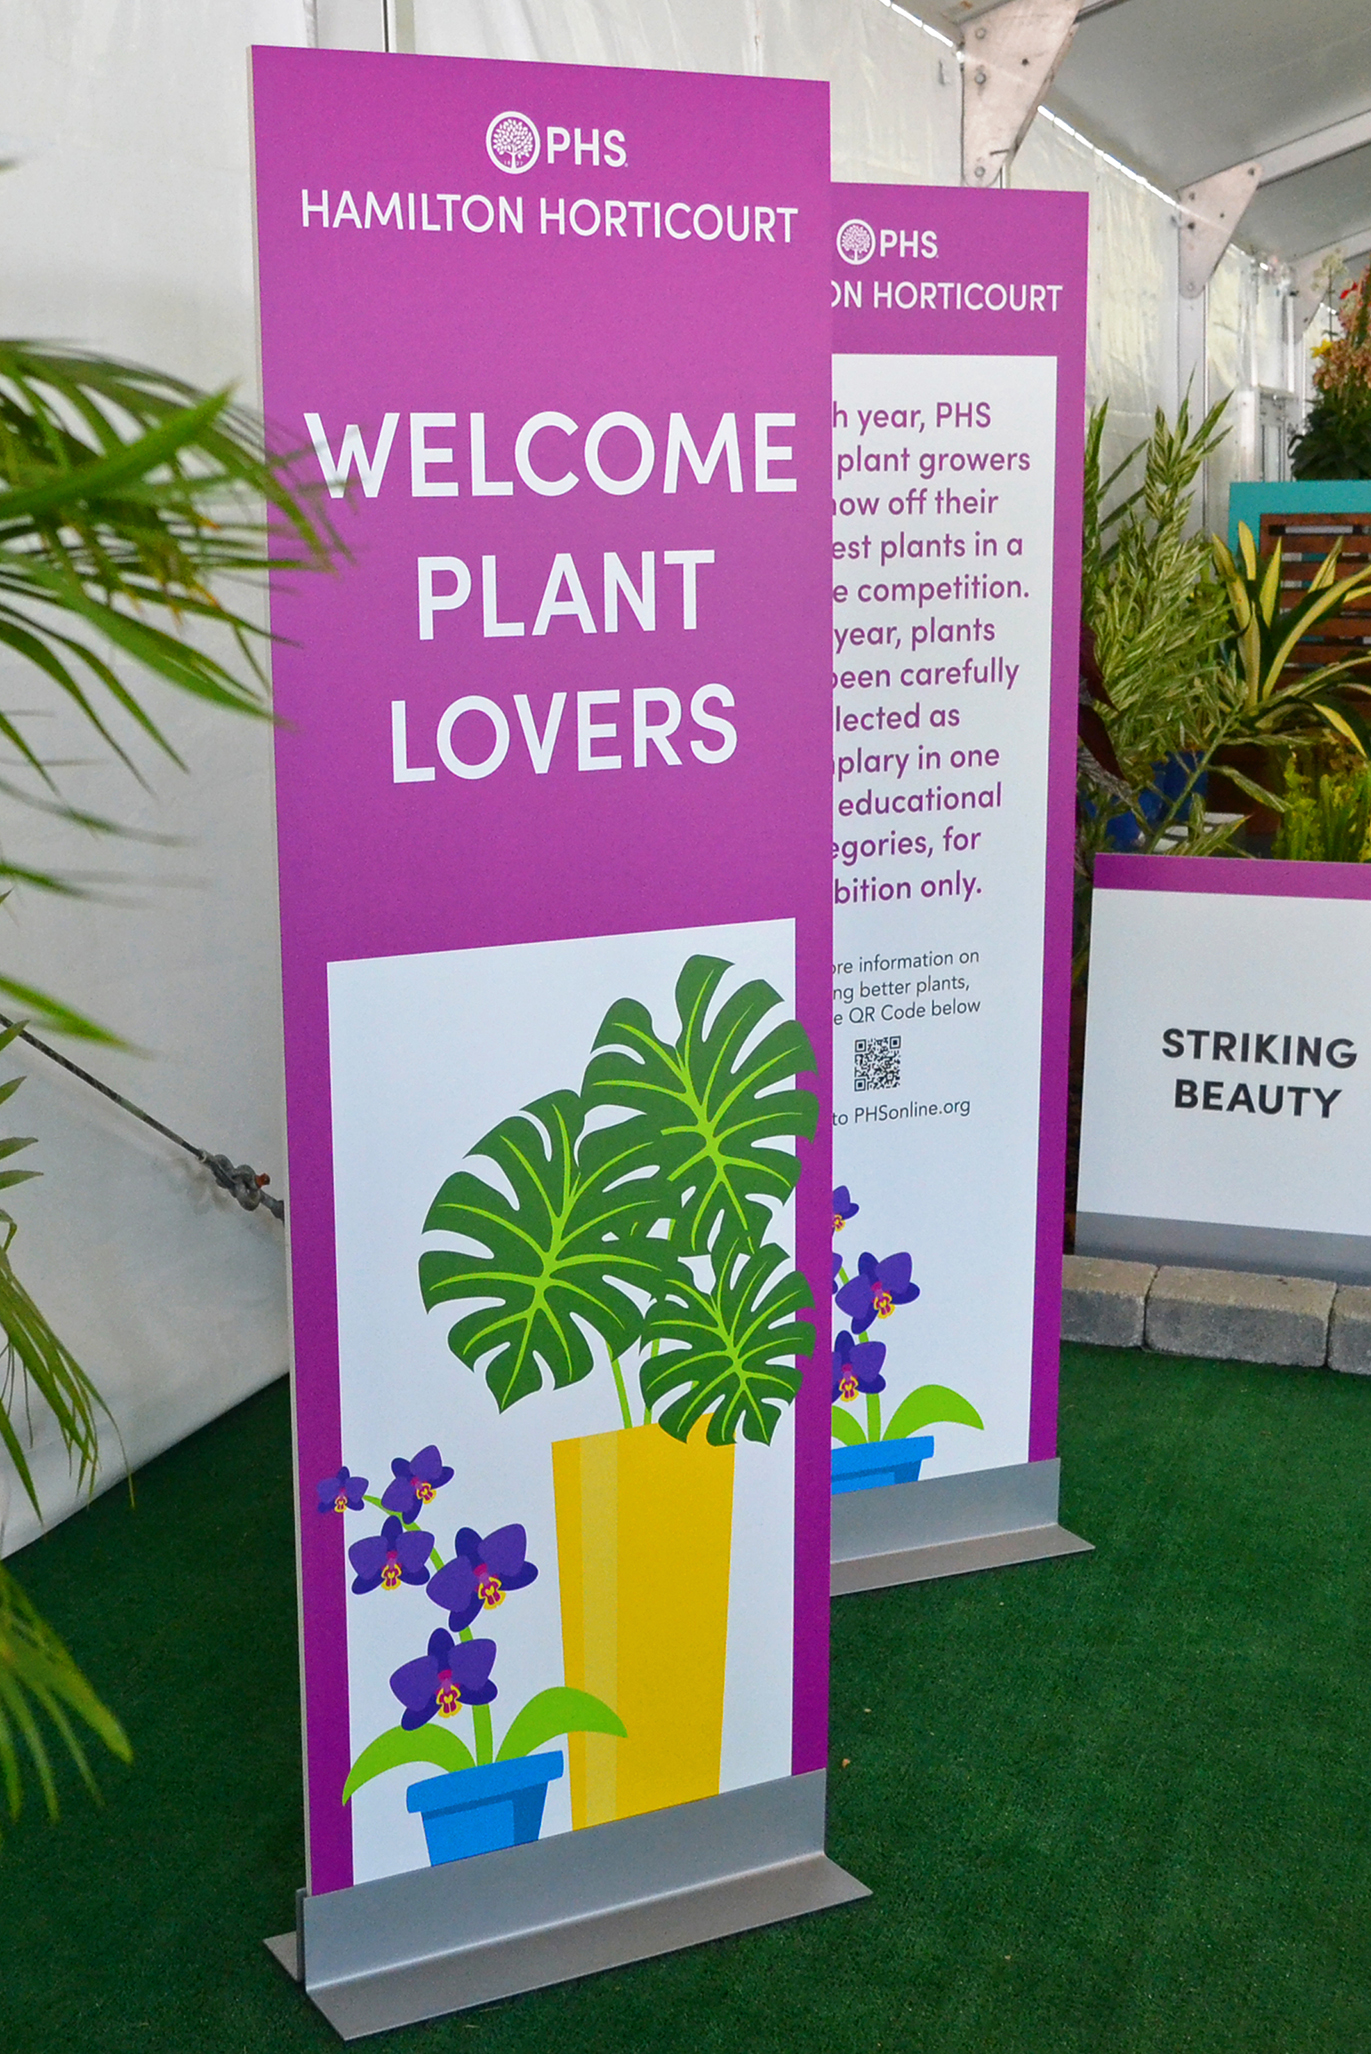 Signage in the Hamilton Horticourt at the 2021 PHS Philadelphia Flower Show.